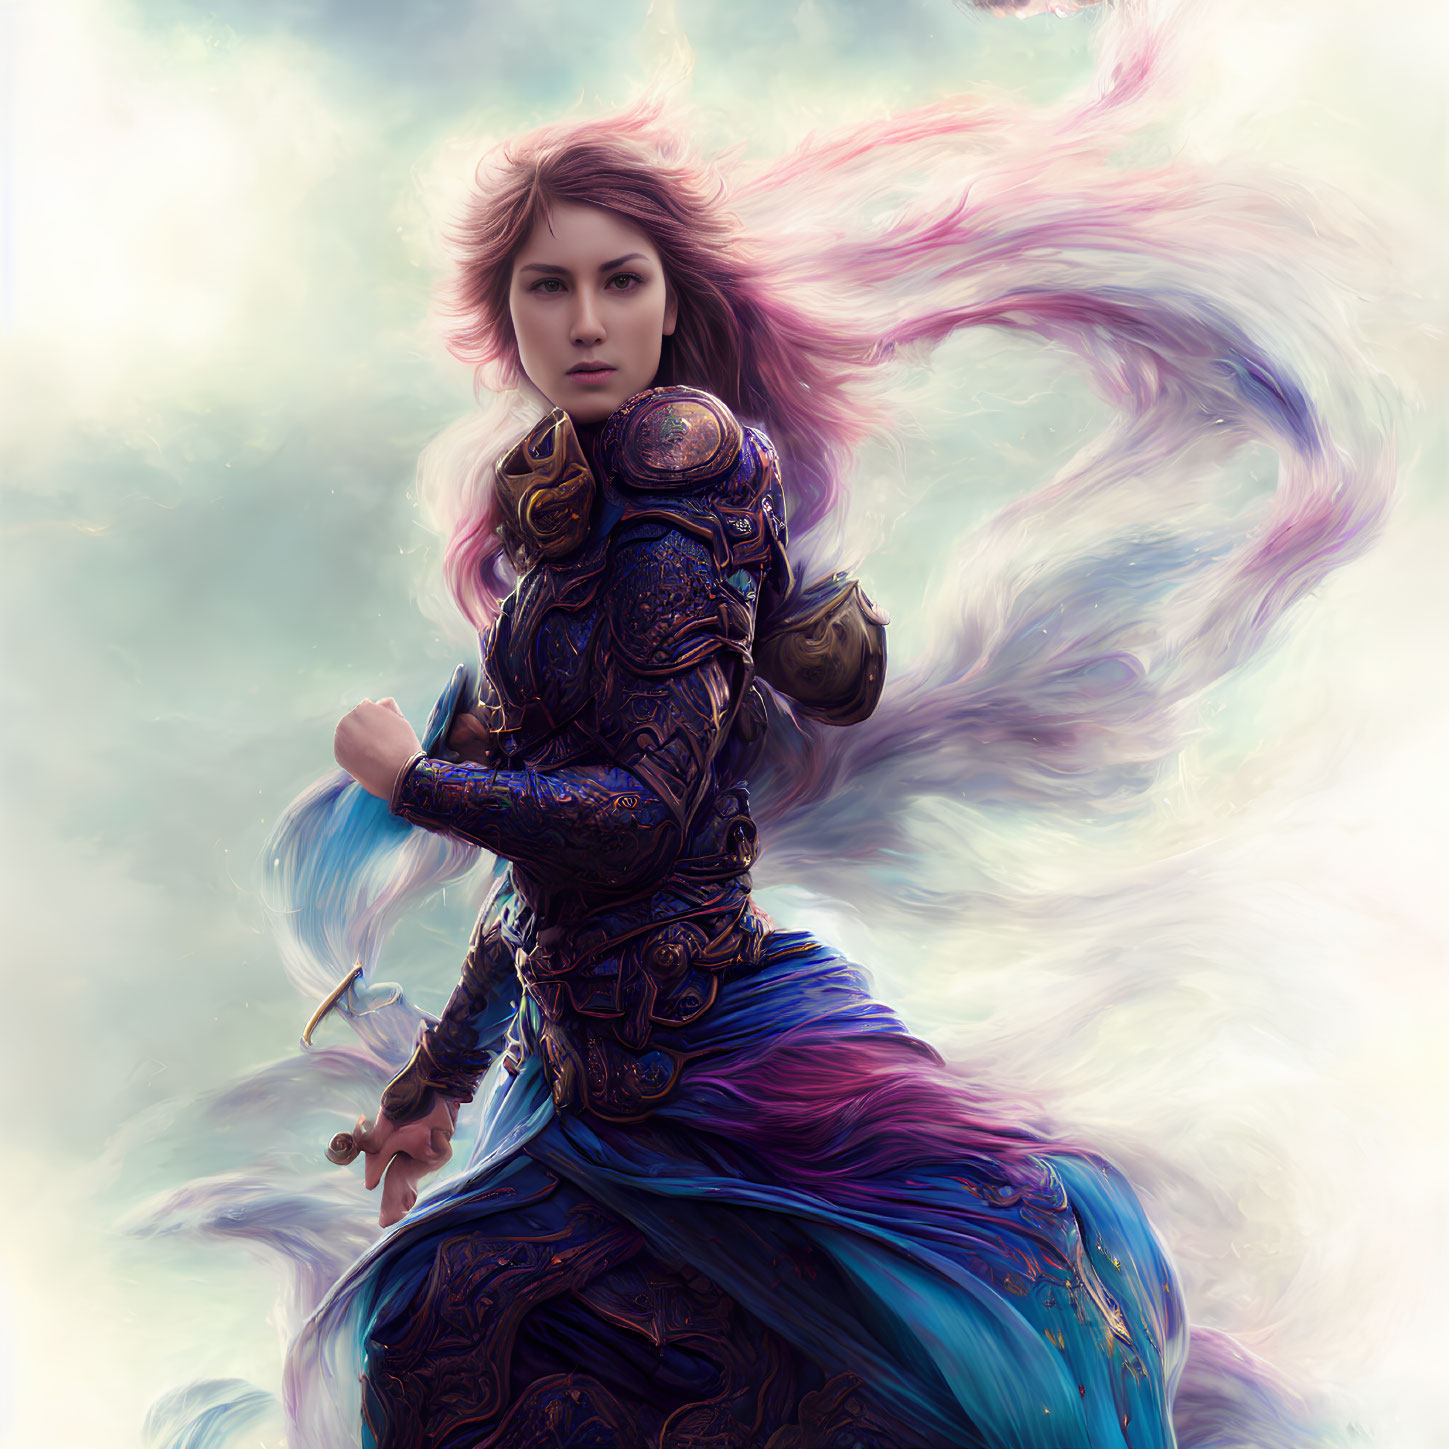 Fantasy warrior woman in ornate armor with pink hair and fierce expression in swirling clouds